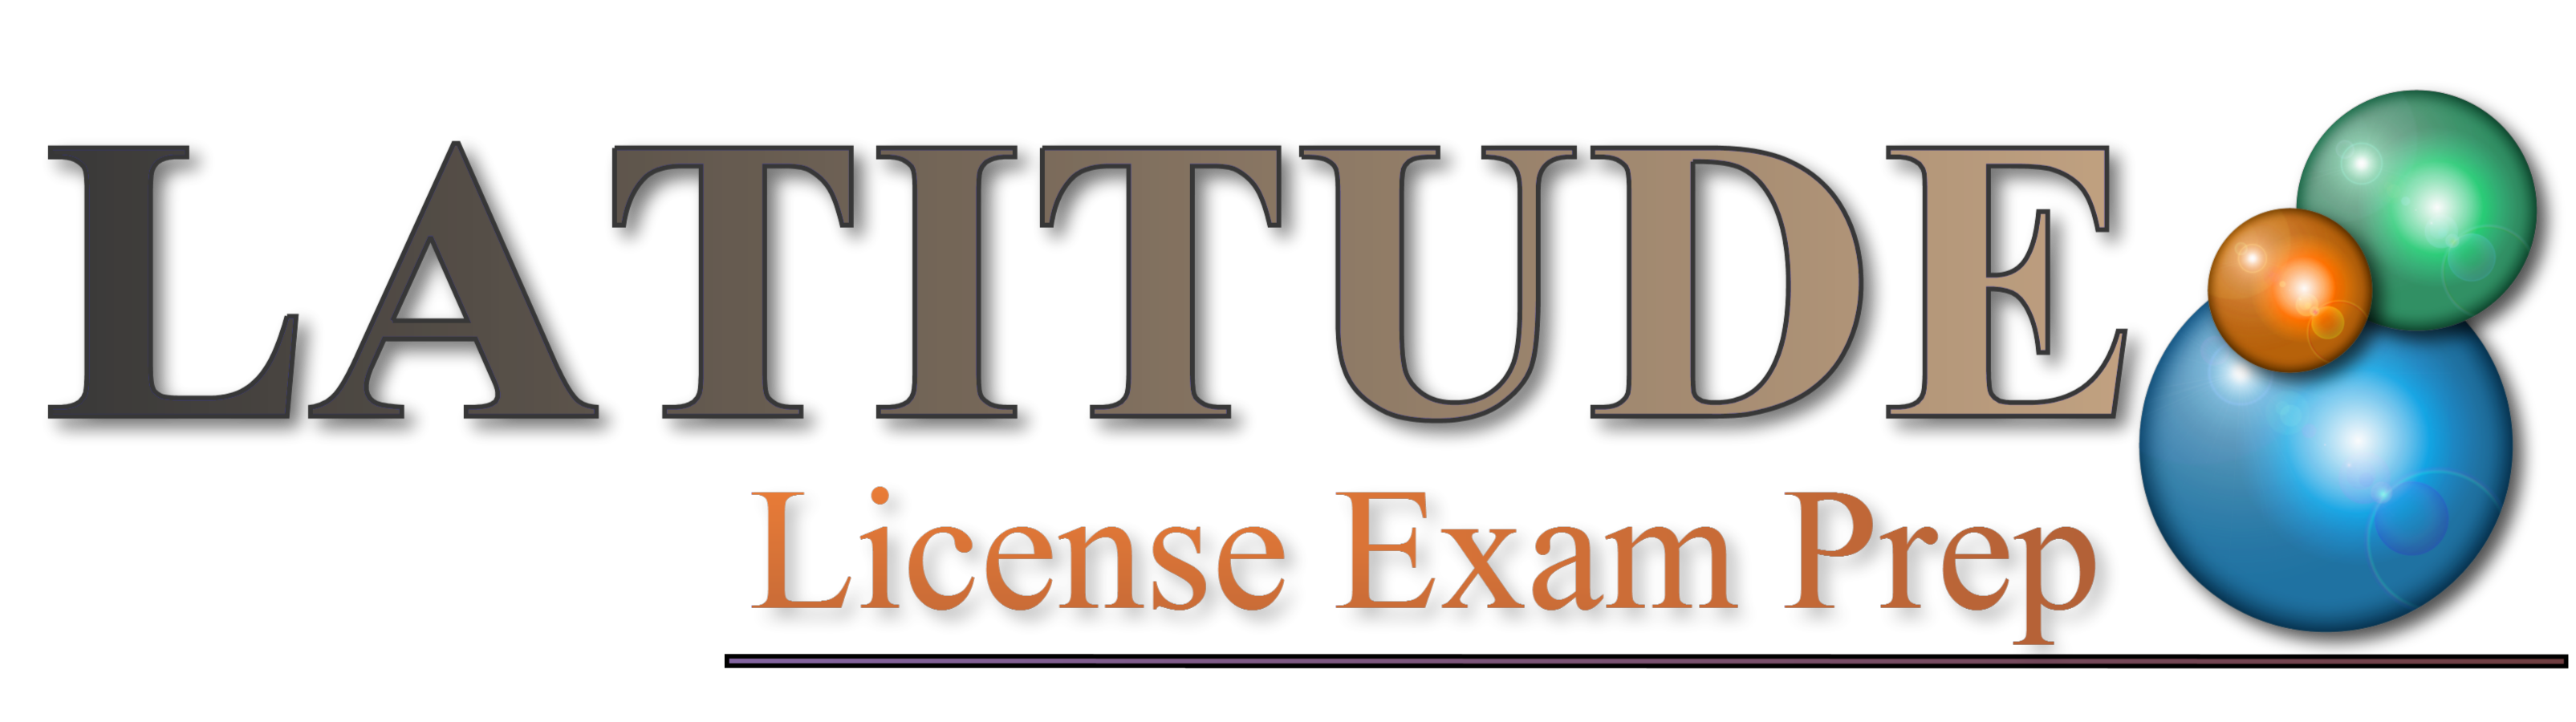 Practice Questions for Insurance License Exam